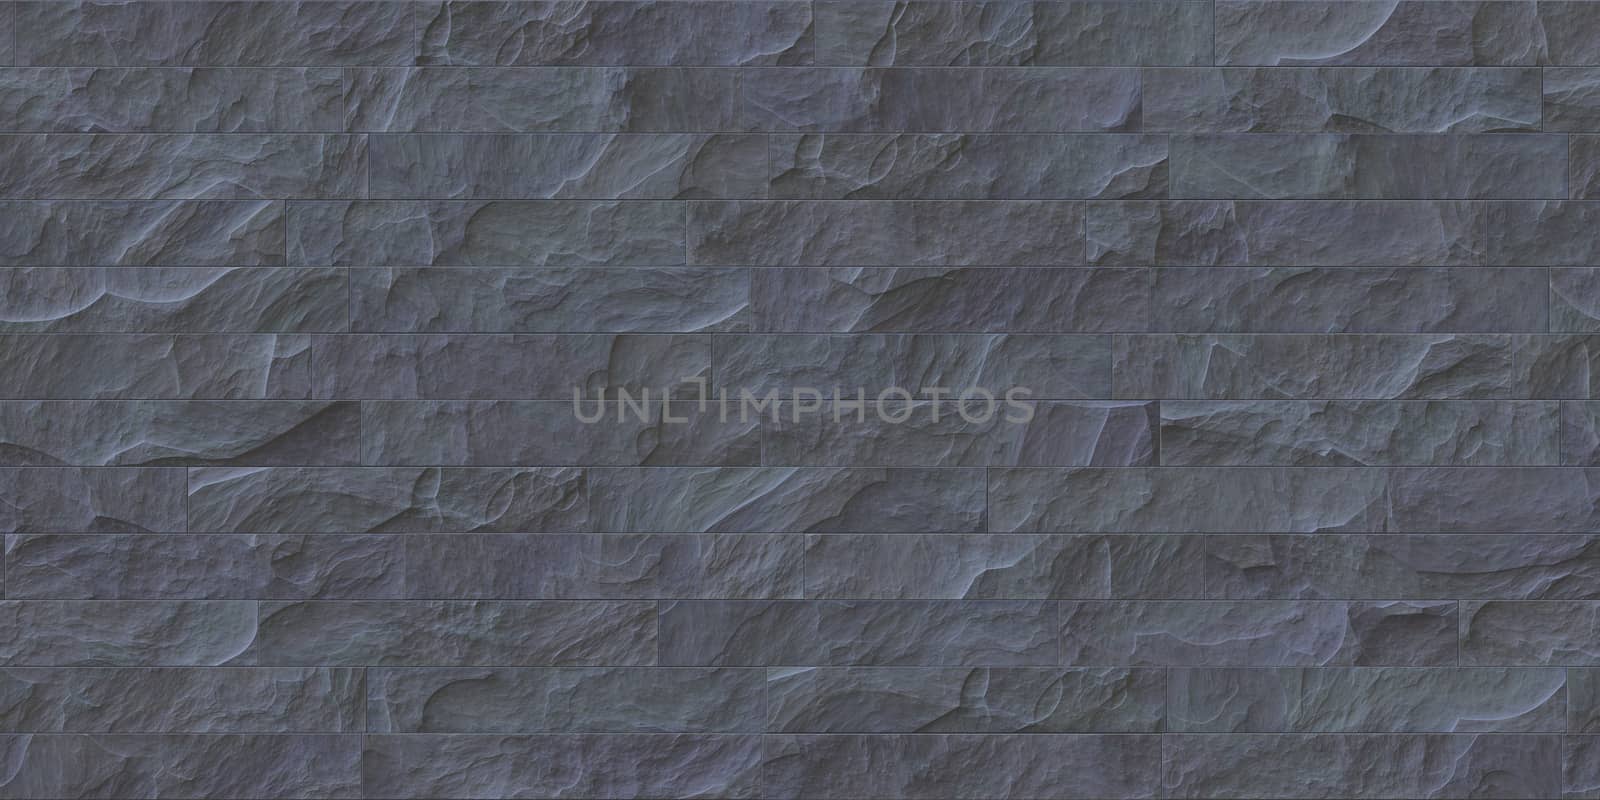 Slate gray outdoor stone cladding seamless surface. Stone tiles facing house wall.